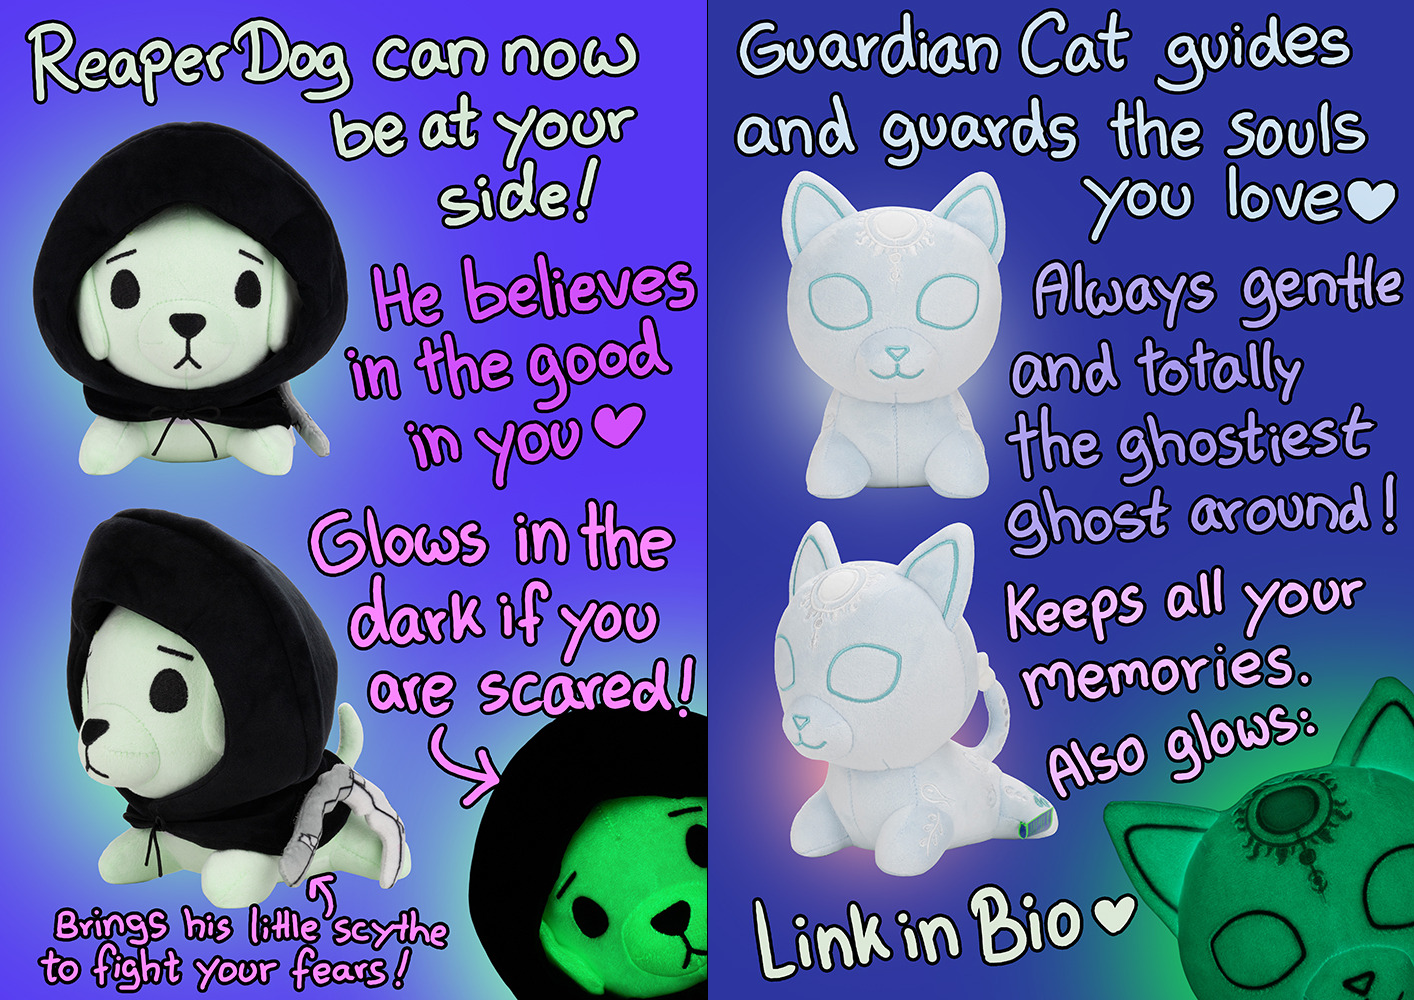 Now available, Reaper dog and Guardian cat, Click here to buy